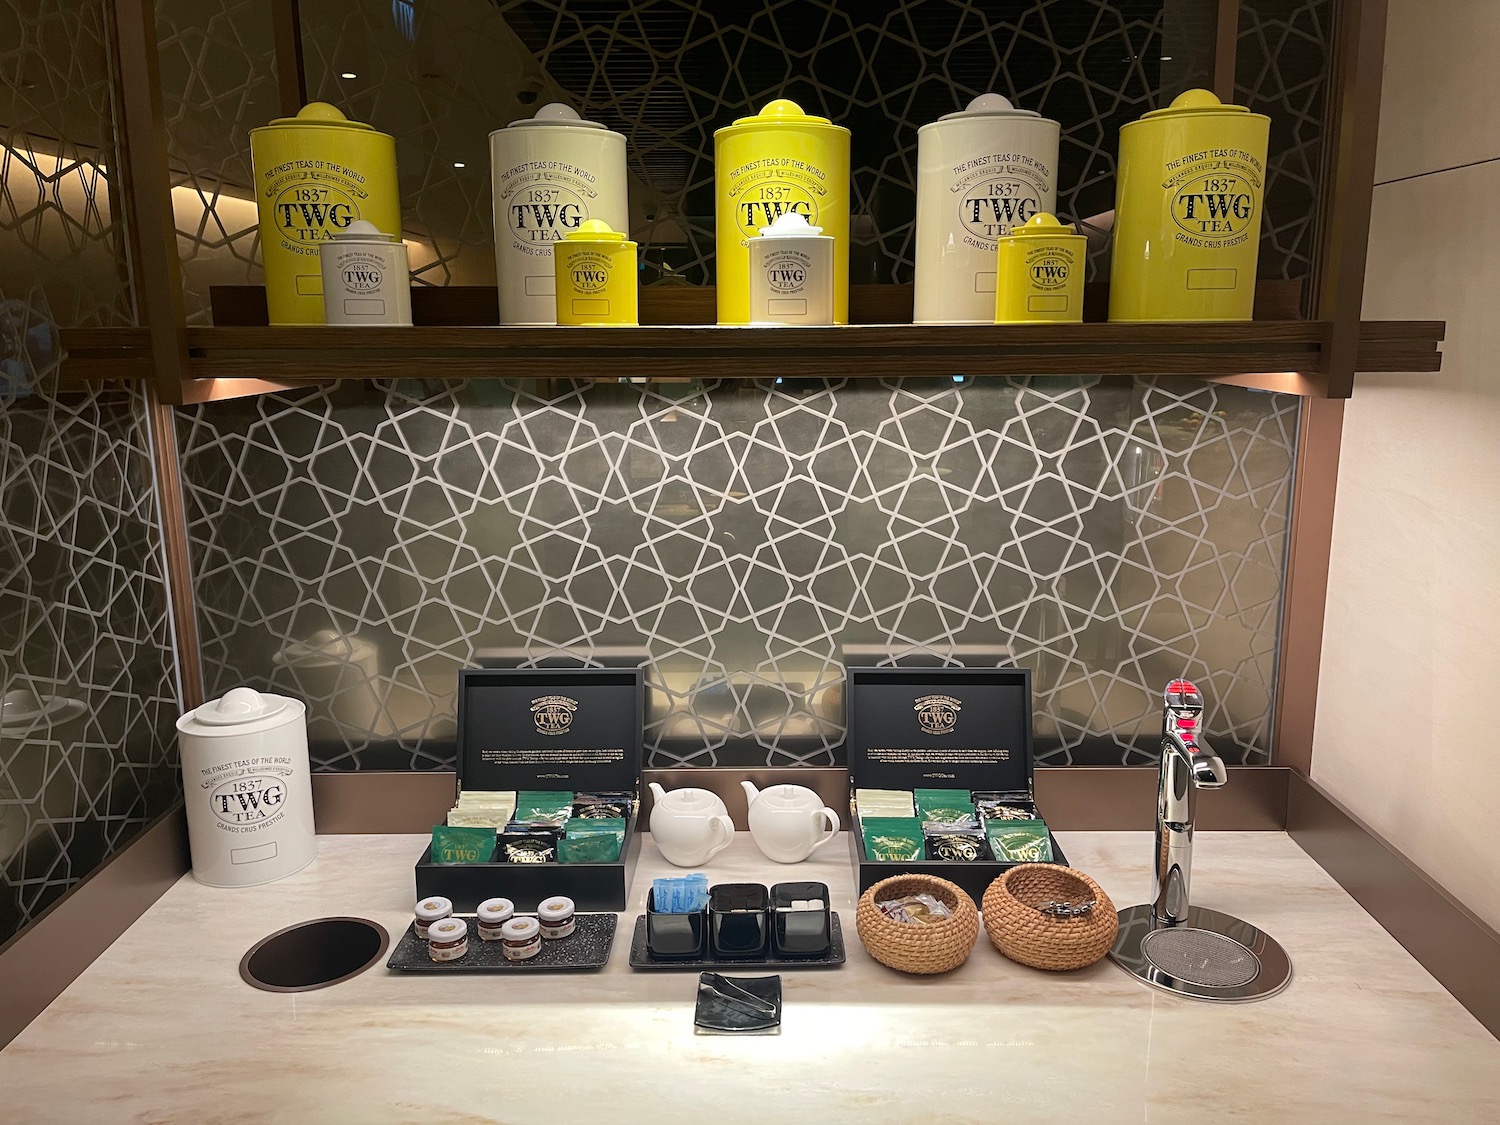 a counter with a variety of tea items